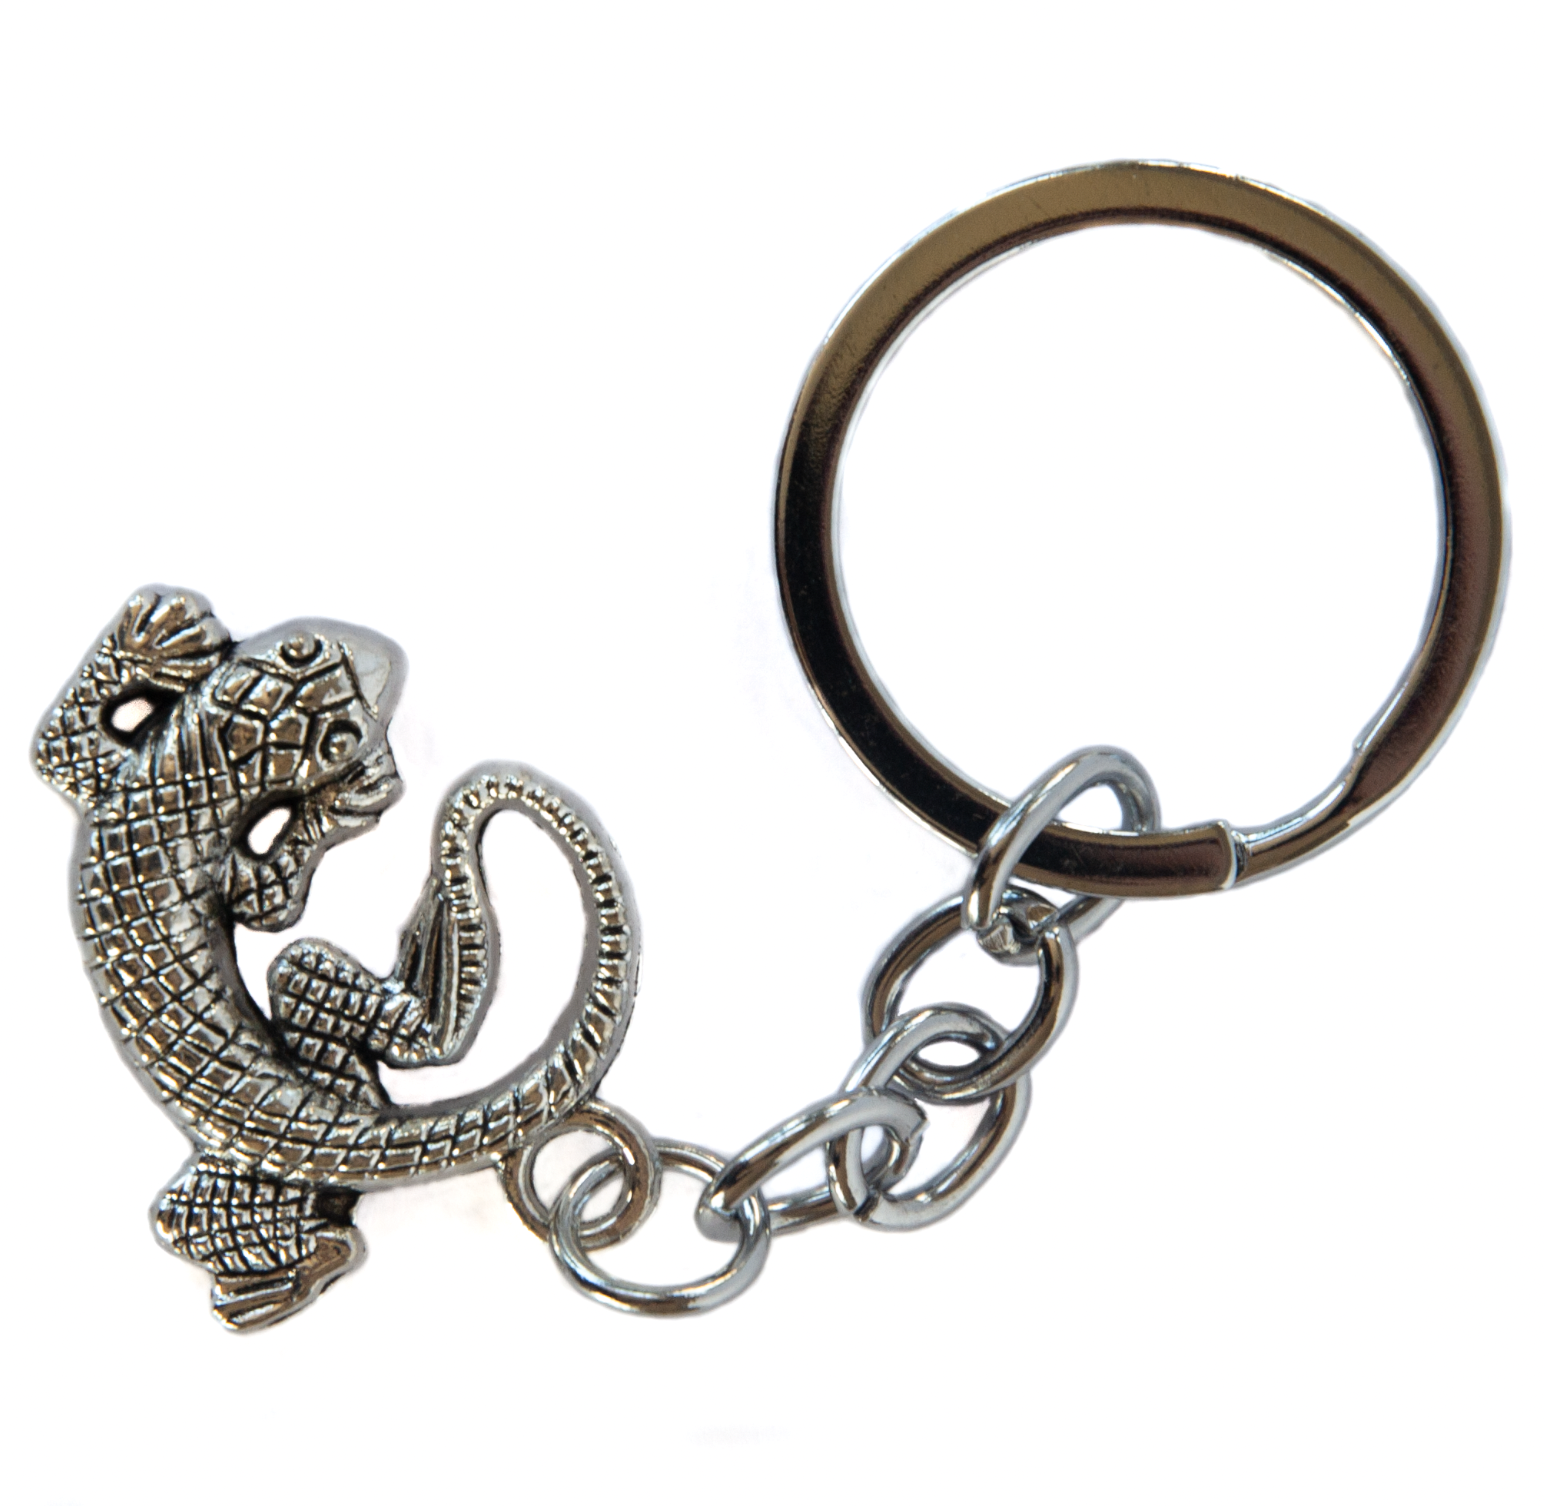 Silver lizard keychain lizard reptile gift collectable reptile keychain